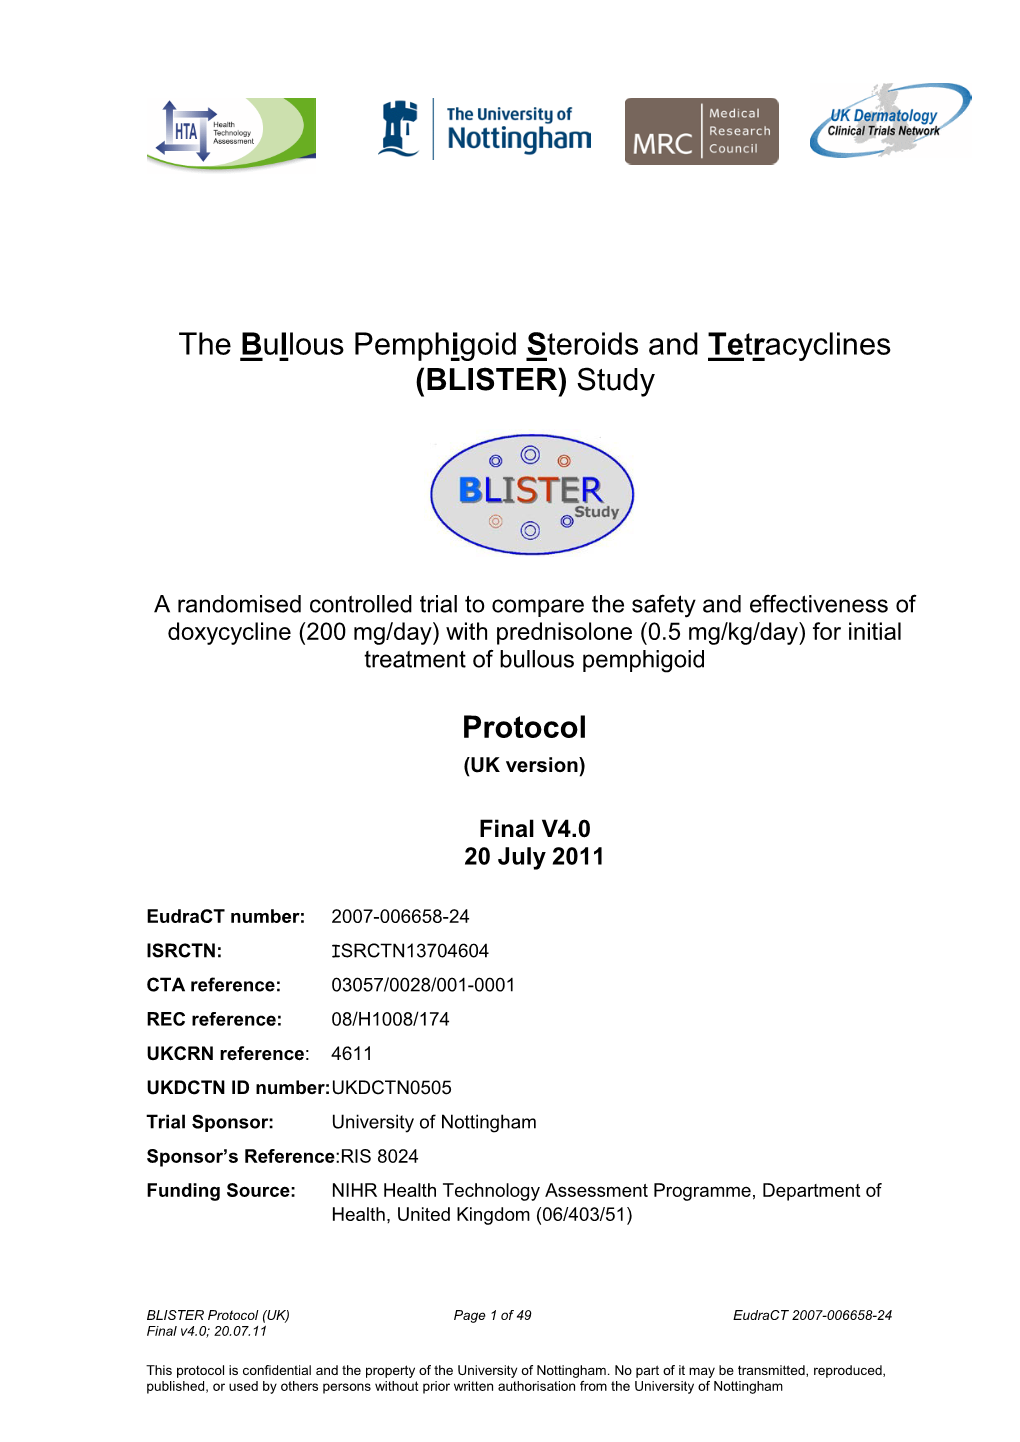 The Bullous Pemphigoid Steroids and Tetracyclines (BLISTER) Study